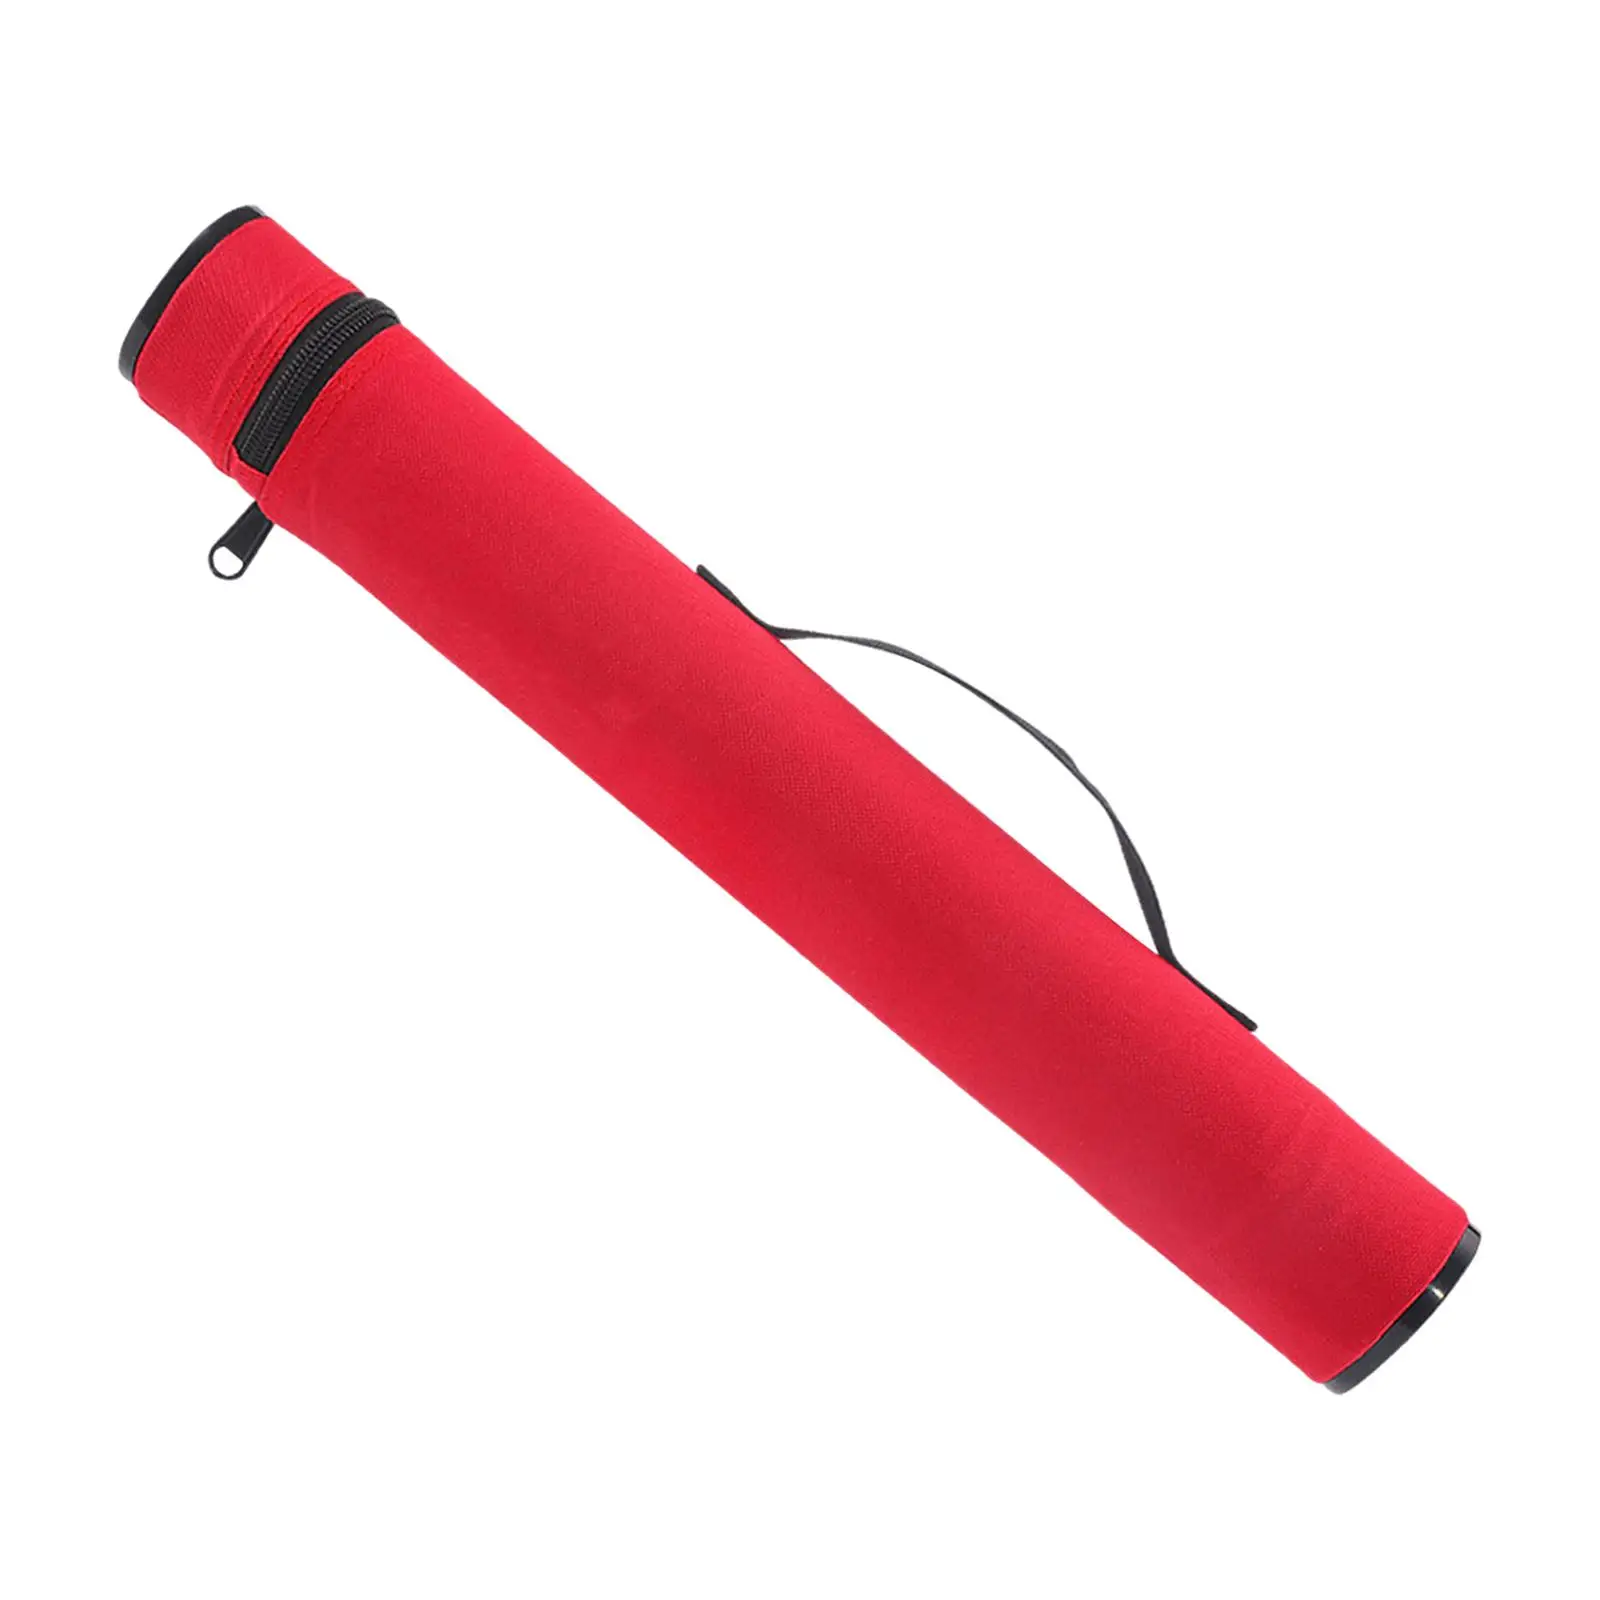 Fly Fishing Rods case Fishing Equipment Protective Cover Portable Men Gift